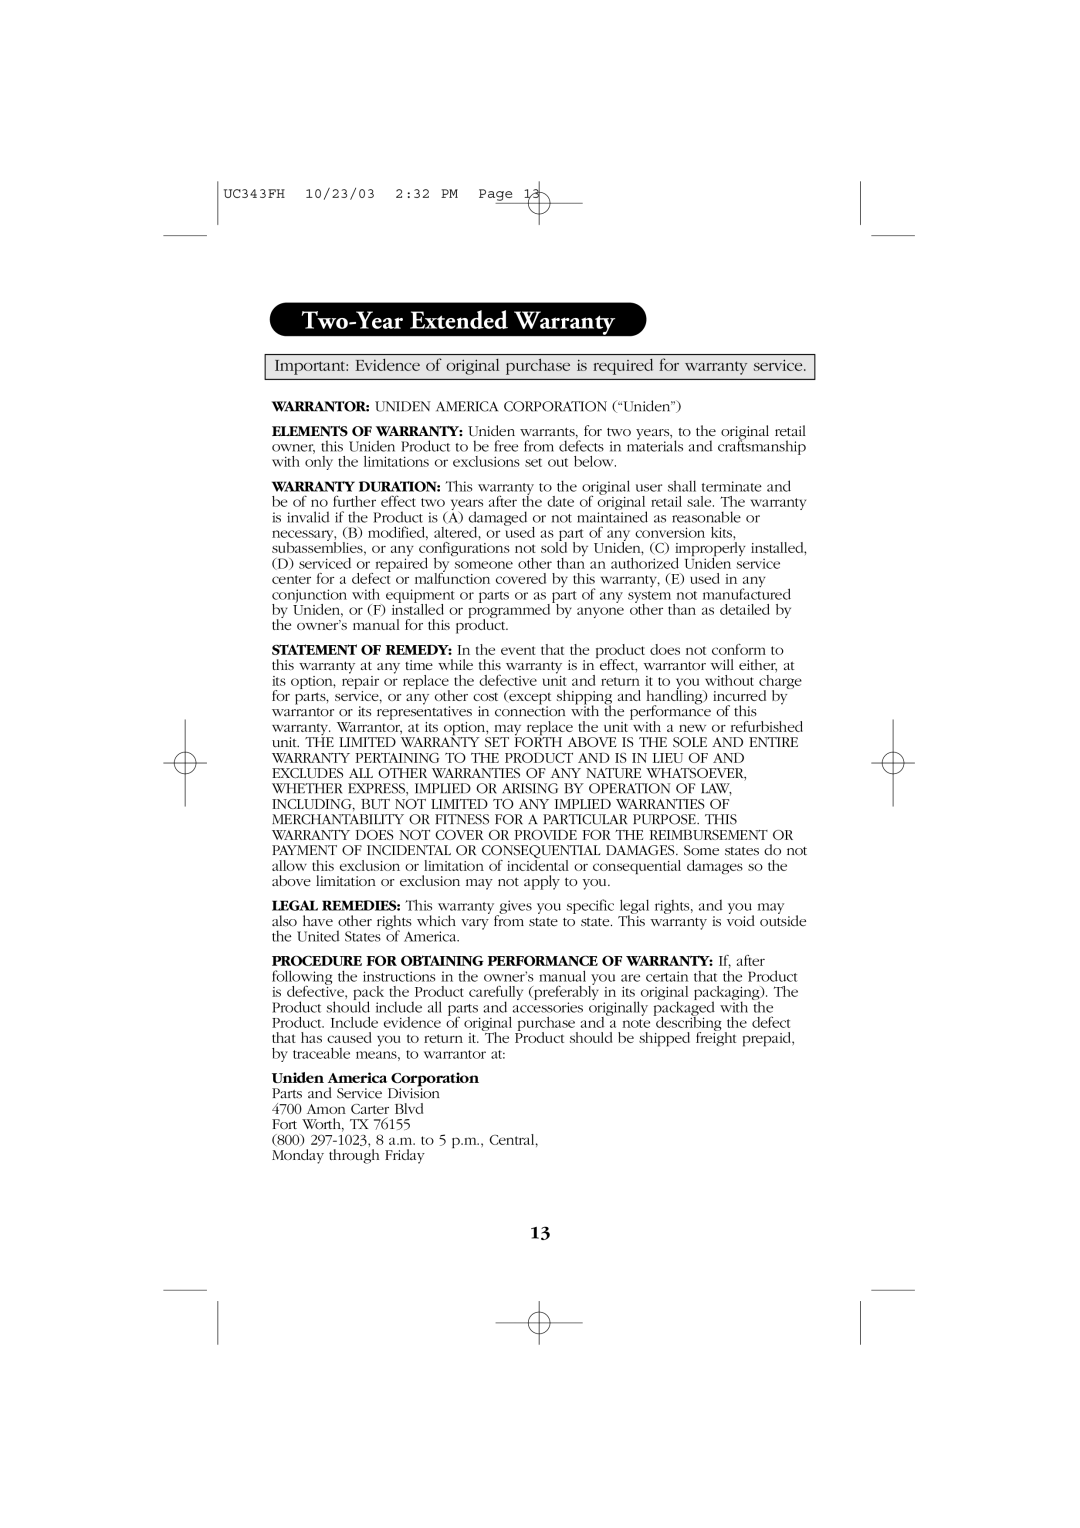 Uniden PC78 manual Two-YearExtended Warranty, Uniden America Corporation 